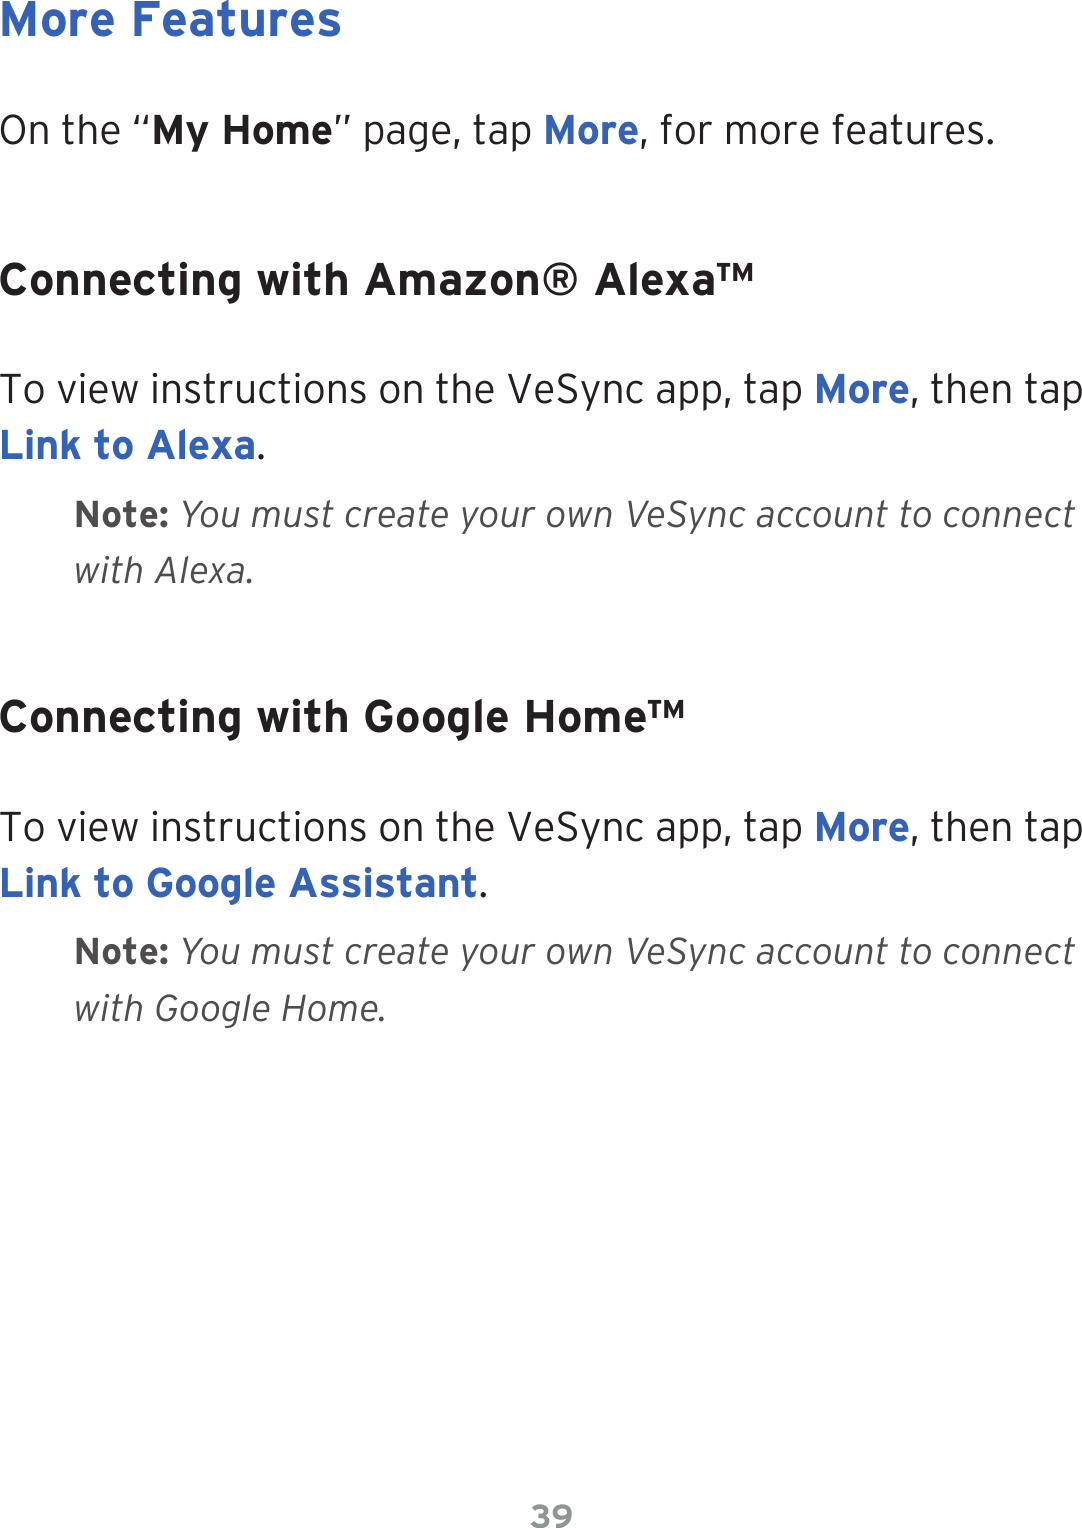 39On the “My Home” page, tap More, for more features.To view instructions on the VeSync app, tap More, then tap Link to Alexa. To view instructions on the VeSync app, tap More, then tap Link to Google Assistant.More FeaturesConnecting with Amazon® Alexa™Connecting with Google Home™Note: You must create your own VeSync account to connect with Alexa.Note: You must create your own VeSync account to connect with Google Home.